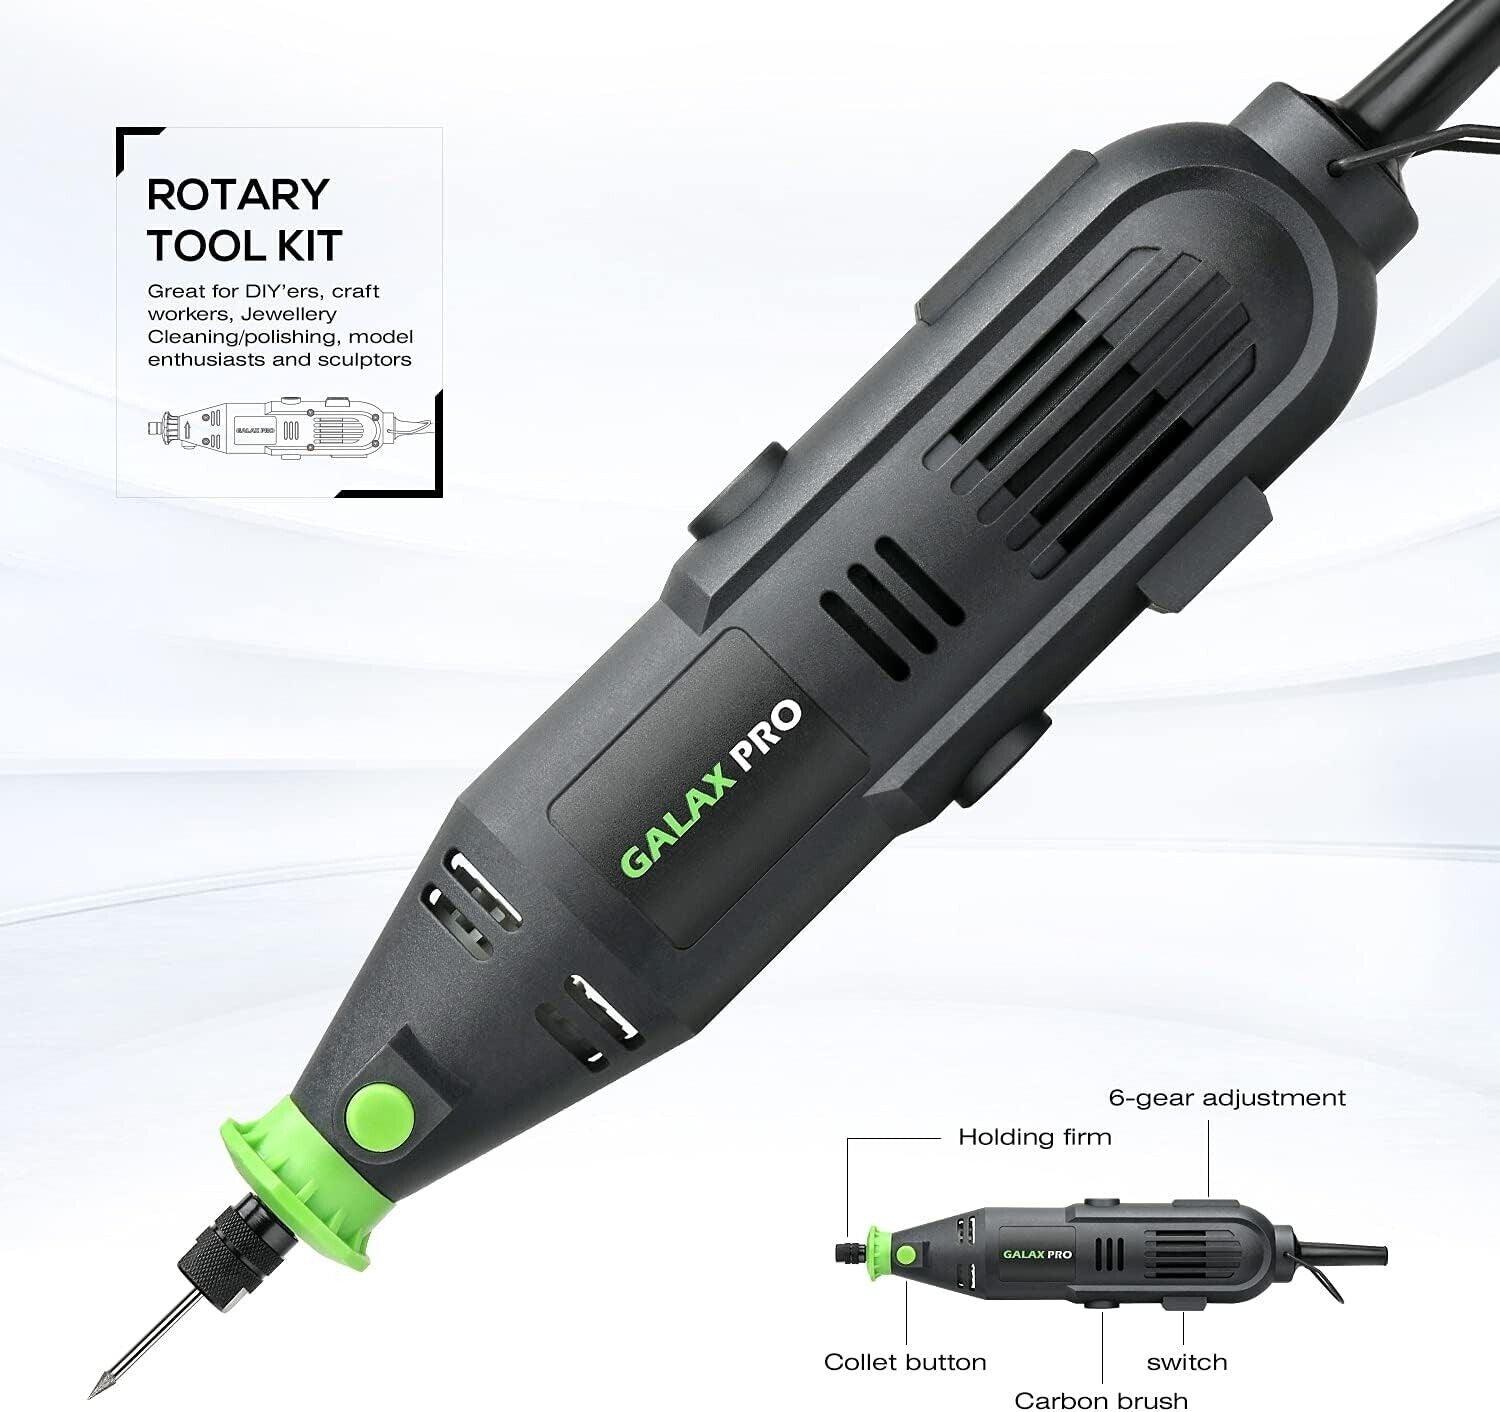 GALAX PRO Rotary Tool Kit, 135W Rotary Variable Speed 8000-32500rpm - Massive Discounts